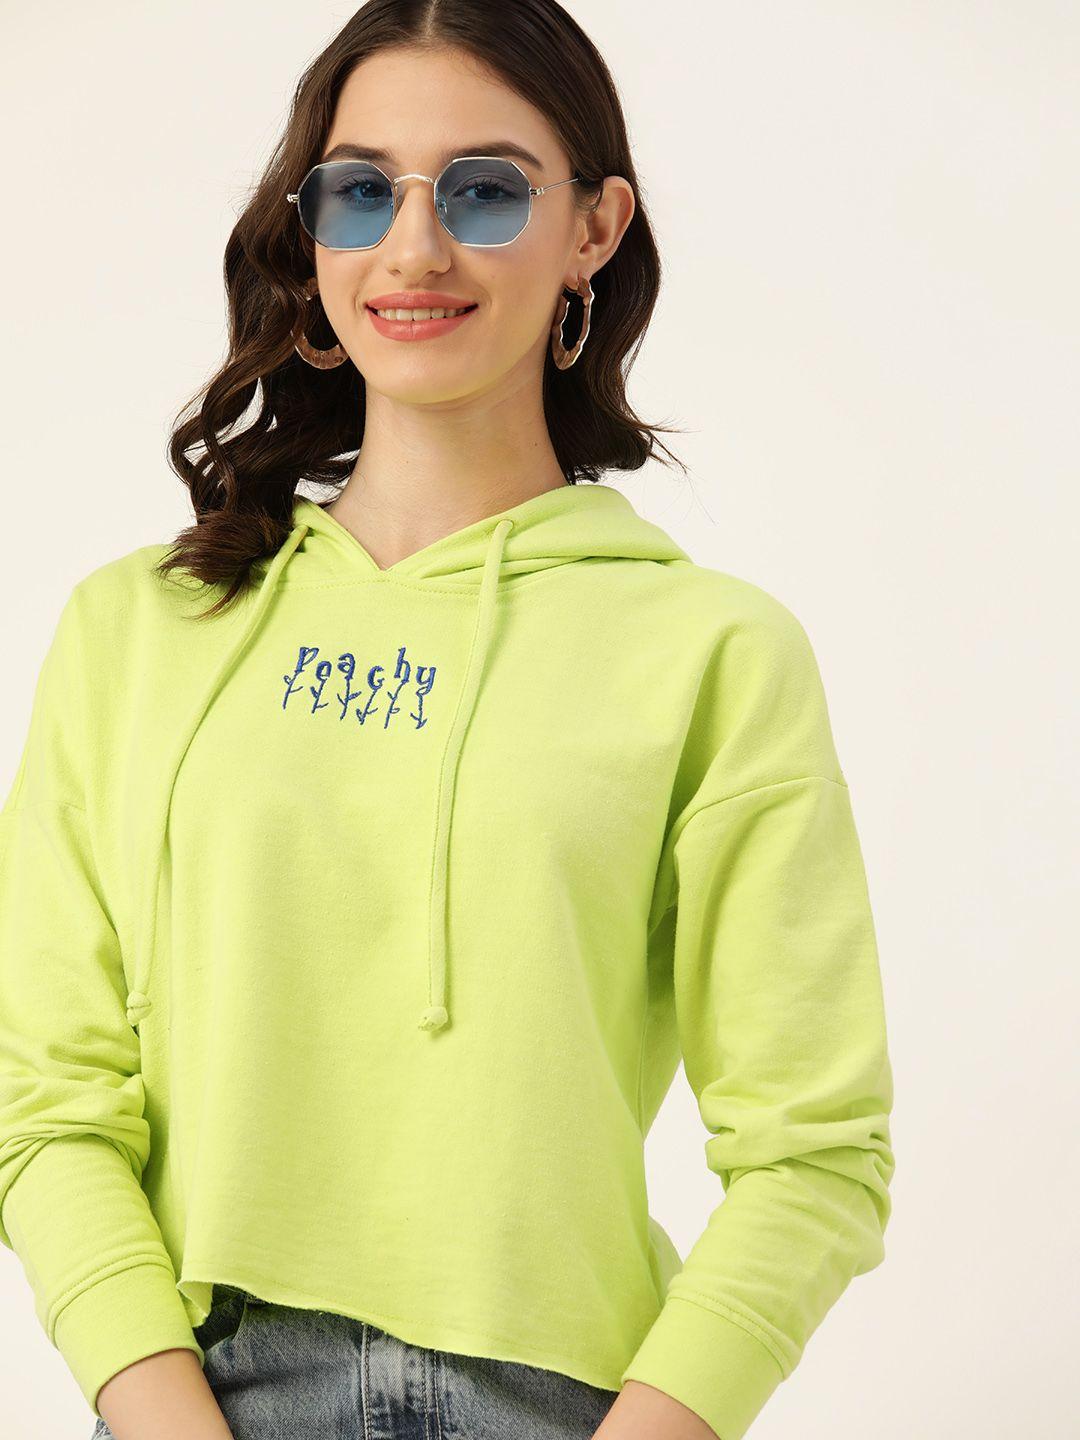 DressBerry Women Lime Green Embroidered Hooded Sweatshirt